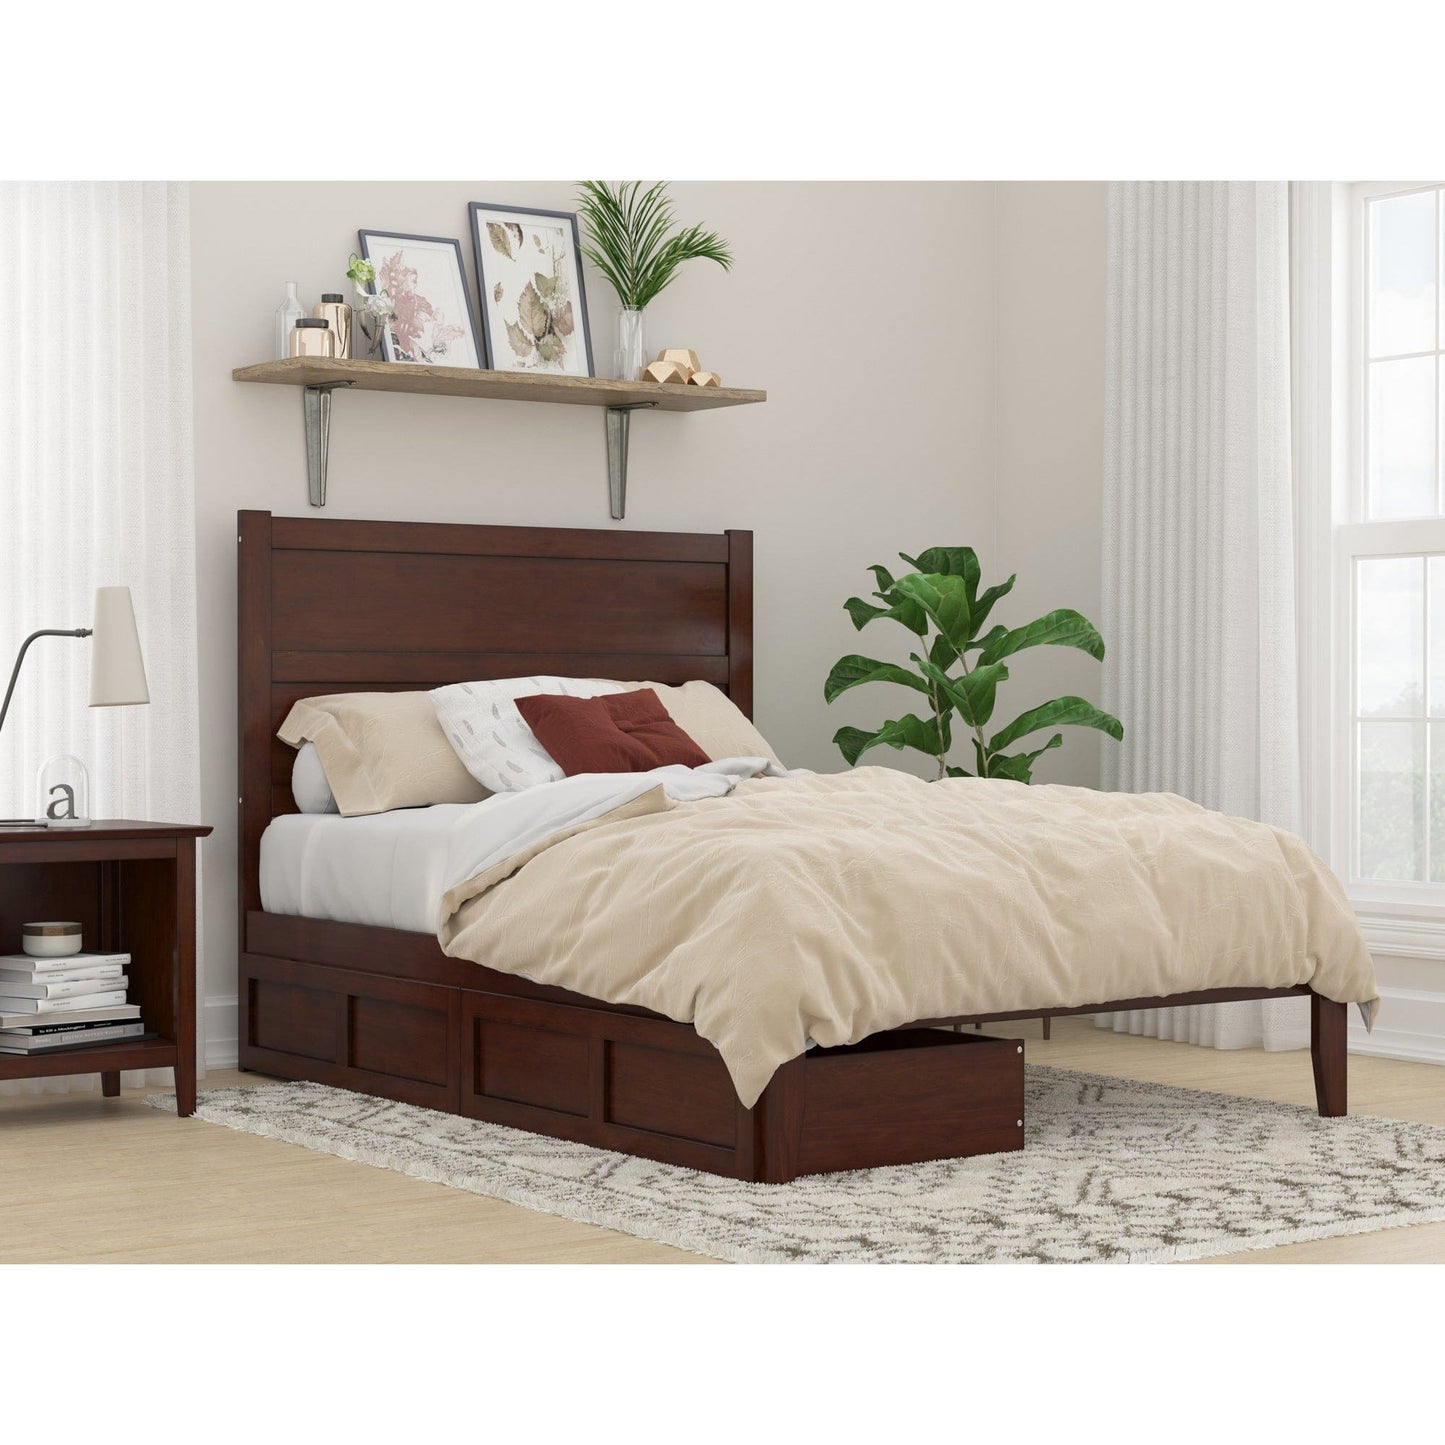 AFI Furnishings NoHo Full Bed with 2 Drawers in Walnut AG9113334